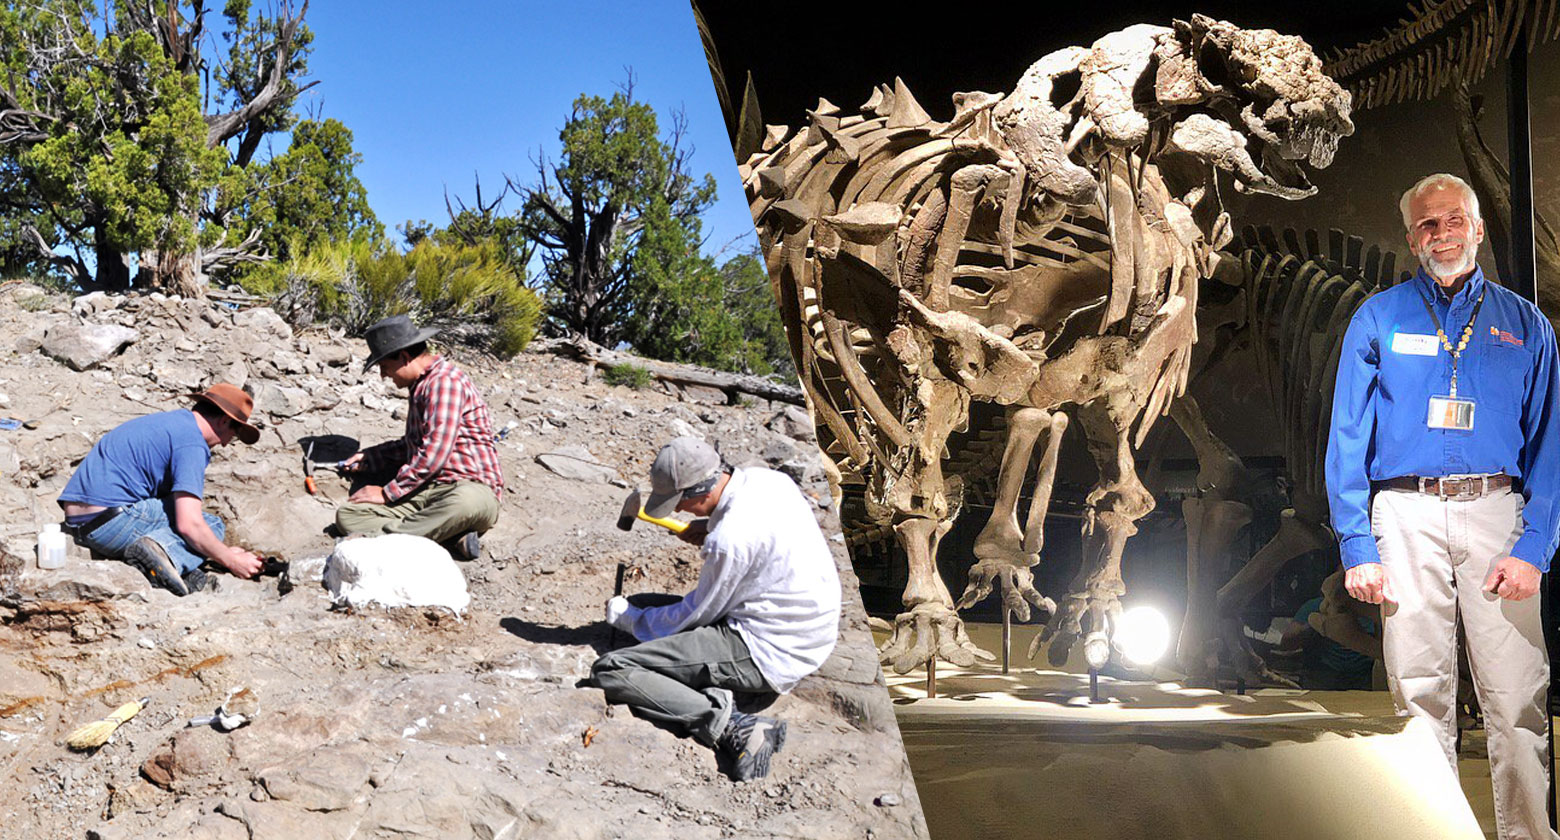 [image] Bringing Dinosaurs to Life Requires a Paleontological Dream Team